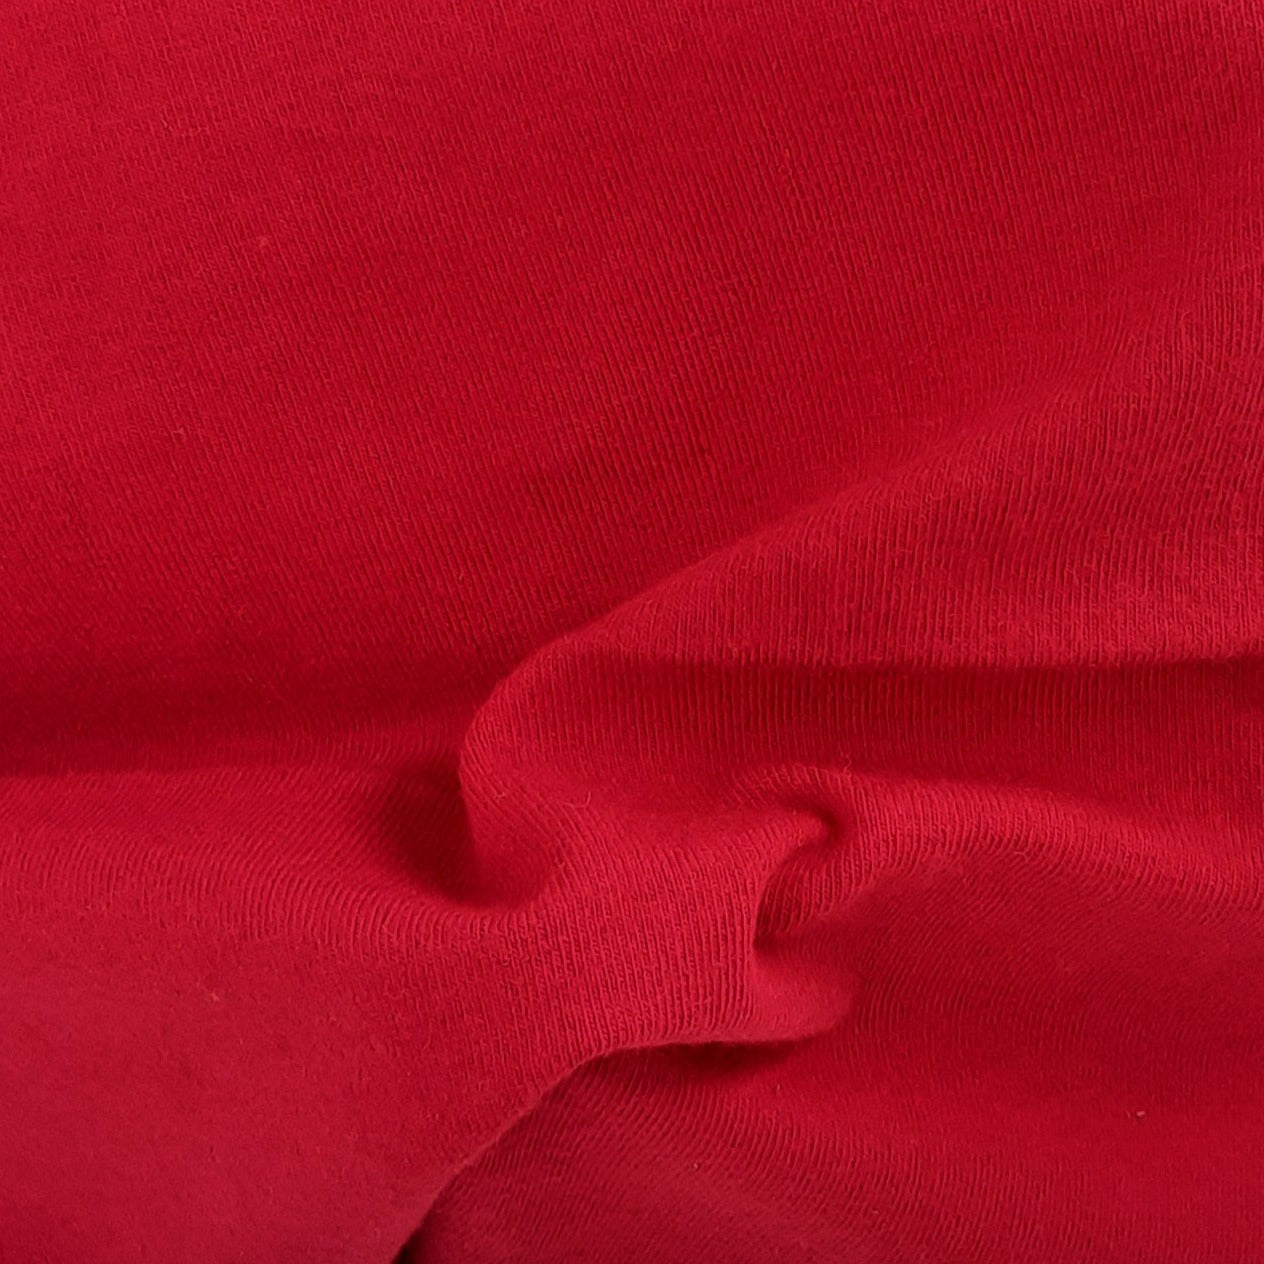 Tomato Red 10 Ounce Cotton/Spandex Jersey Knit Fabric - SKU 2853F